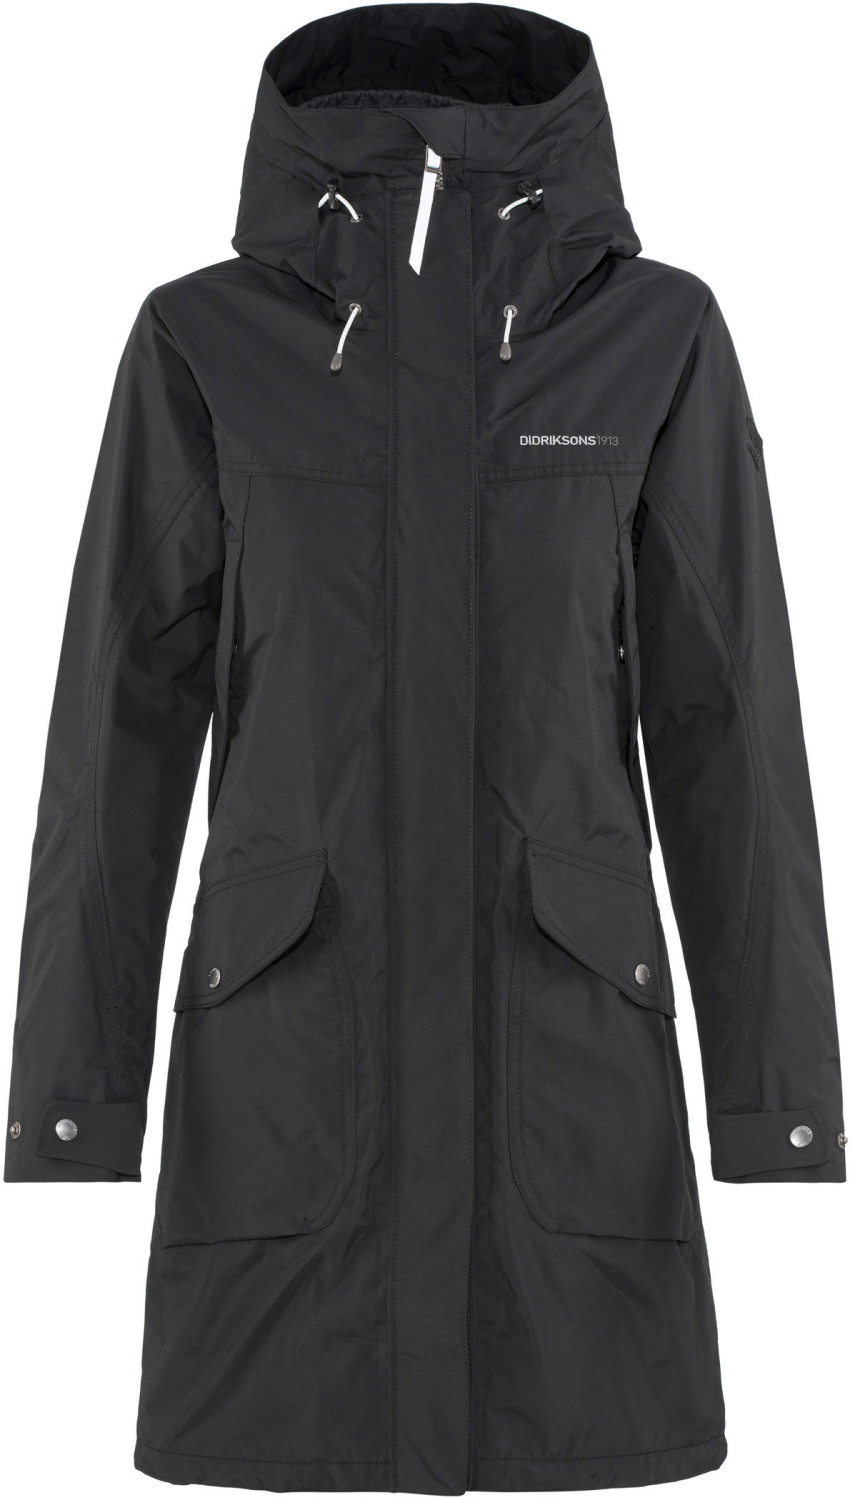 Buy Didriksons Thelma Women's Parka black from £132.84 (Today) – Best ...